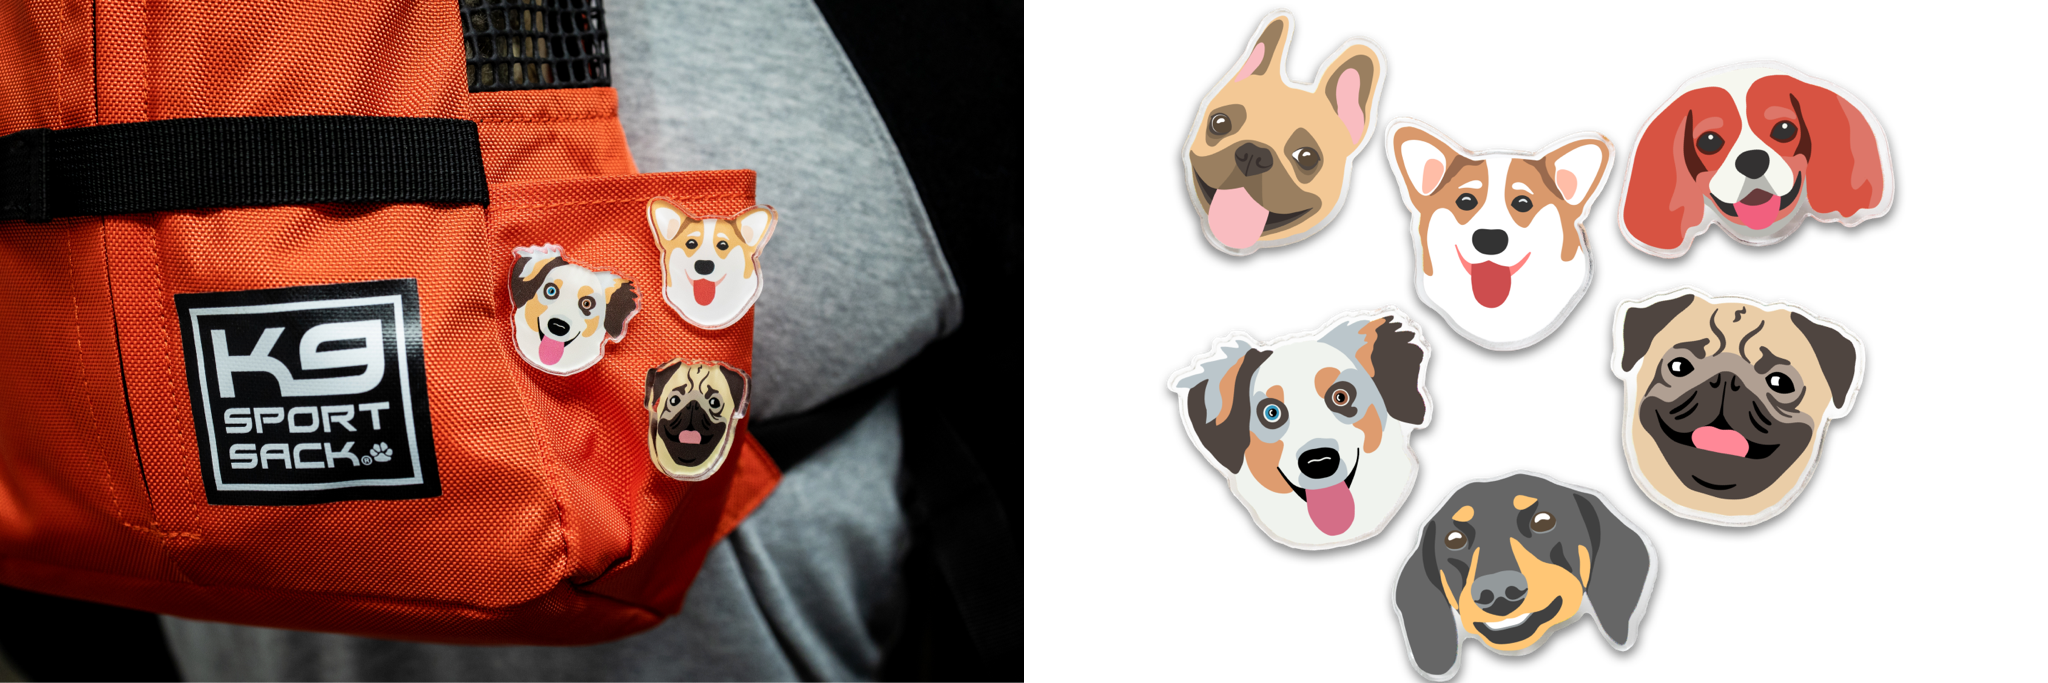 Doggy Pins featuring six different breeds fastened to the pocket of a K9 Sport Sack backpack carrier